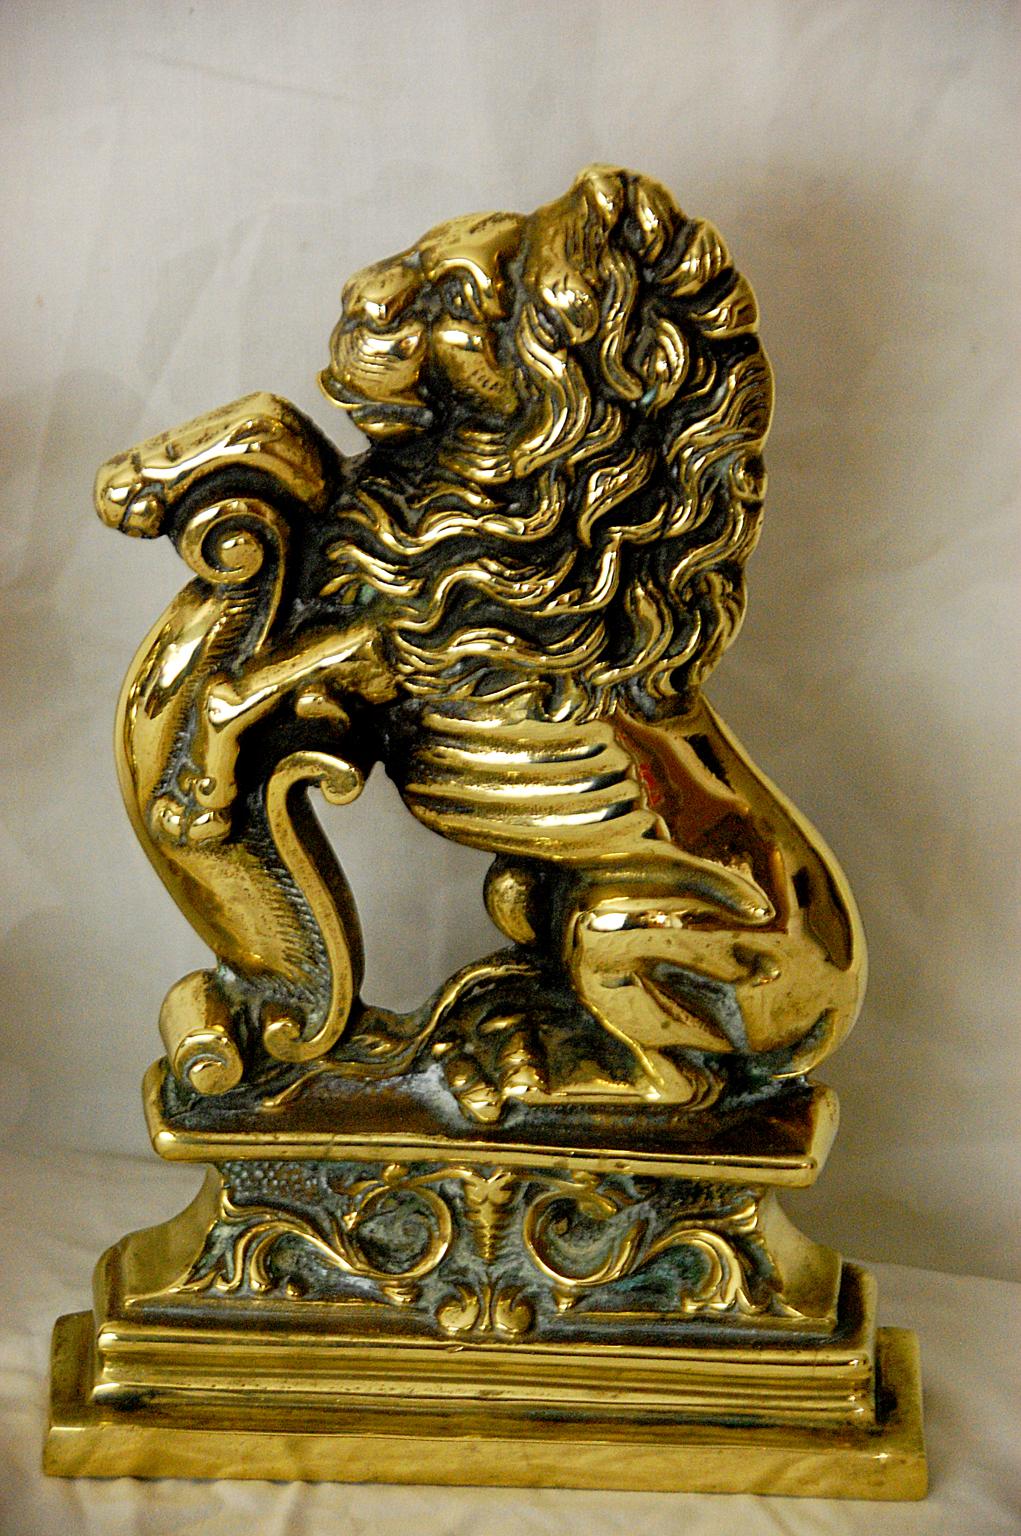 English pair of cast brass rampant lion doorstops of the 19th century. These heavy cast doorstops are a facing pair with bold molded detailing evident in the curly mane, whiskers and tongue, big paws and stepped base with leaf and swirl pattern.